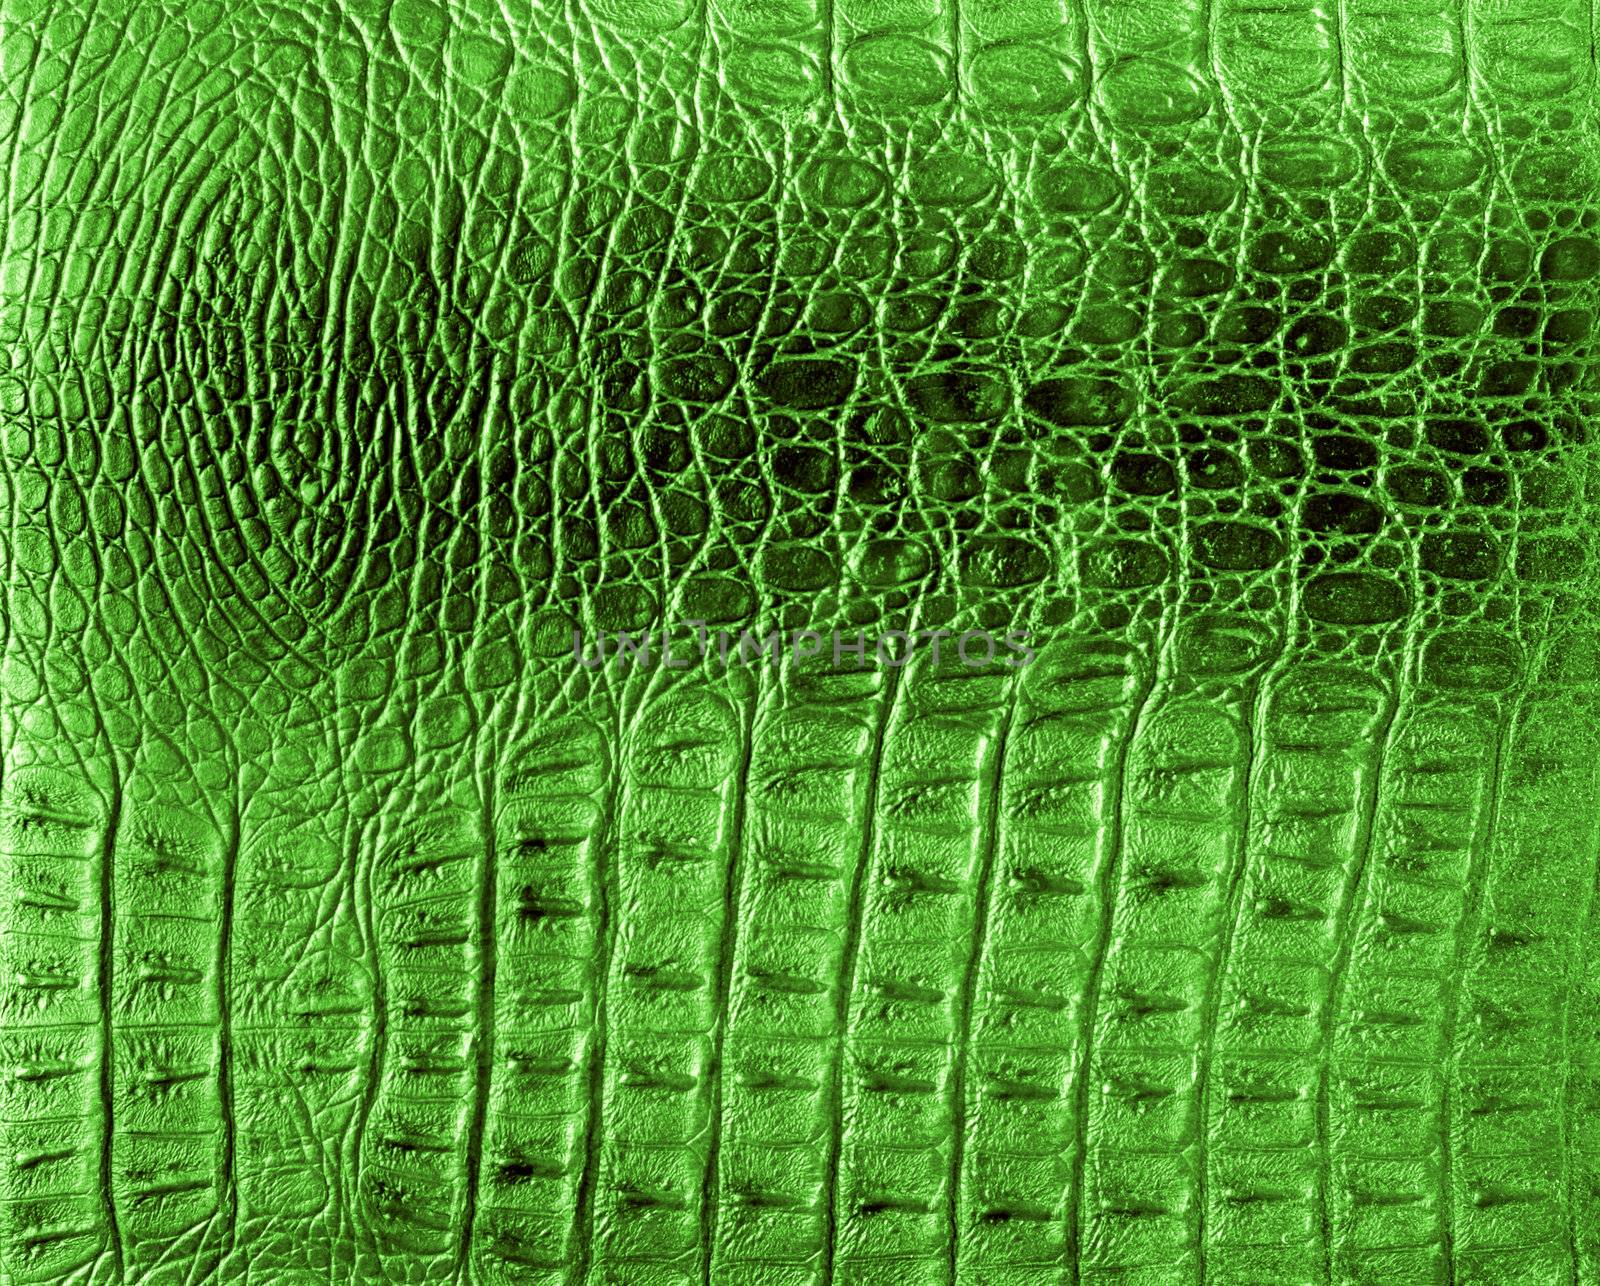 Texture of a reptile skin by Gdolgikh